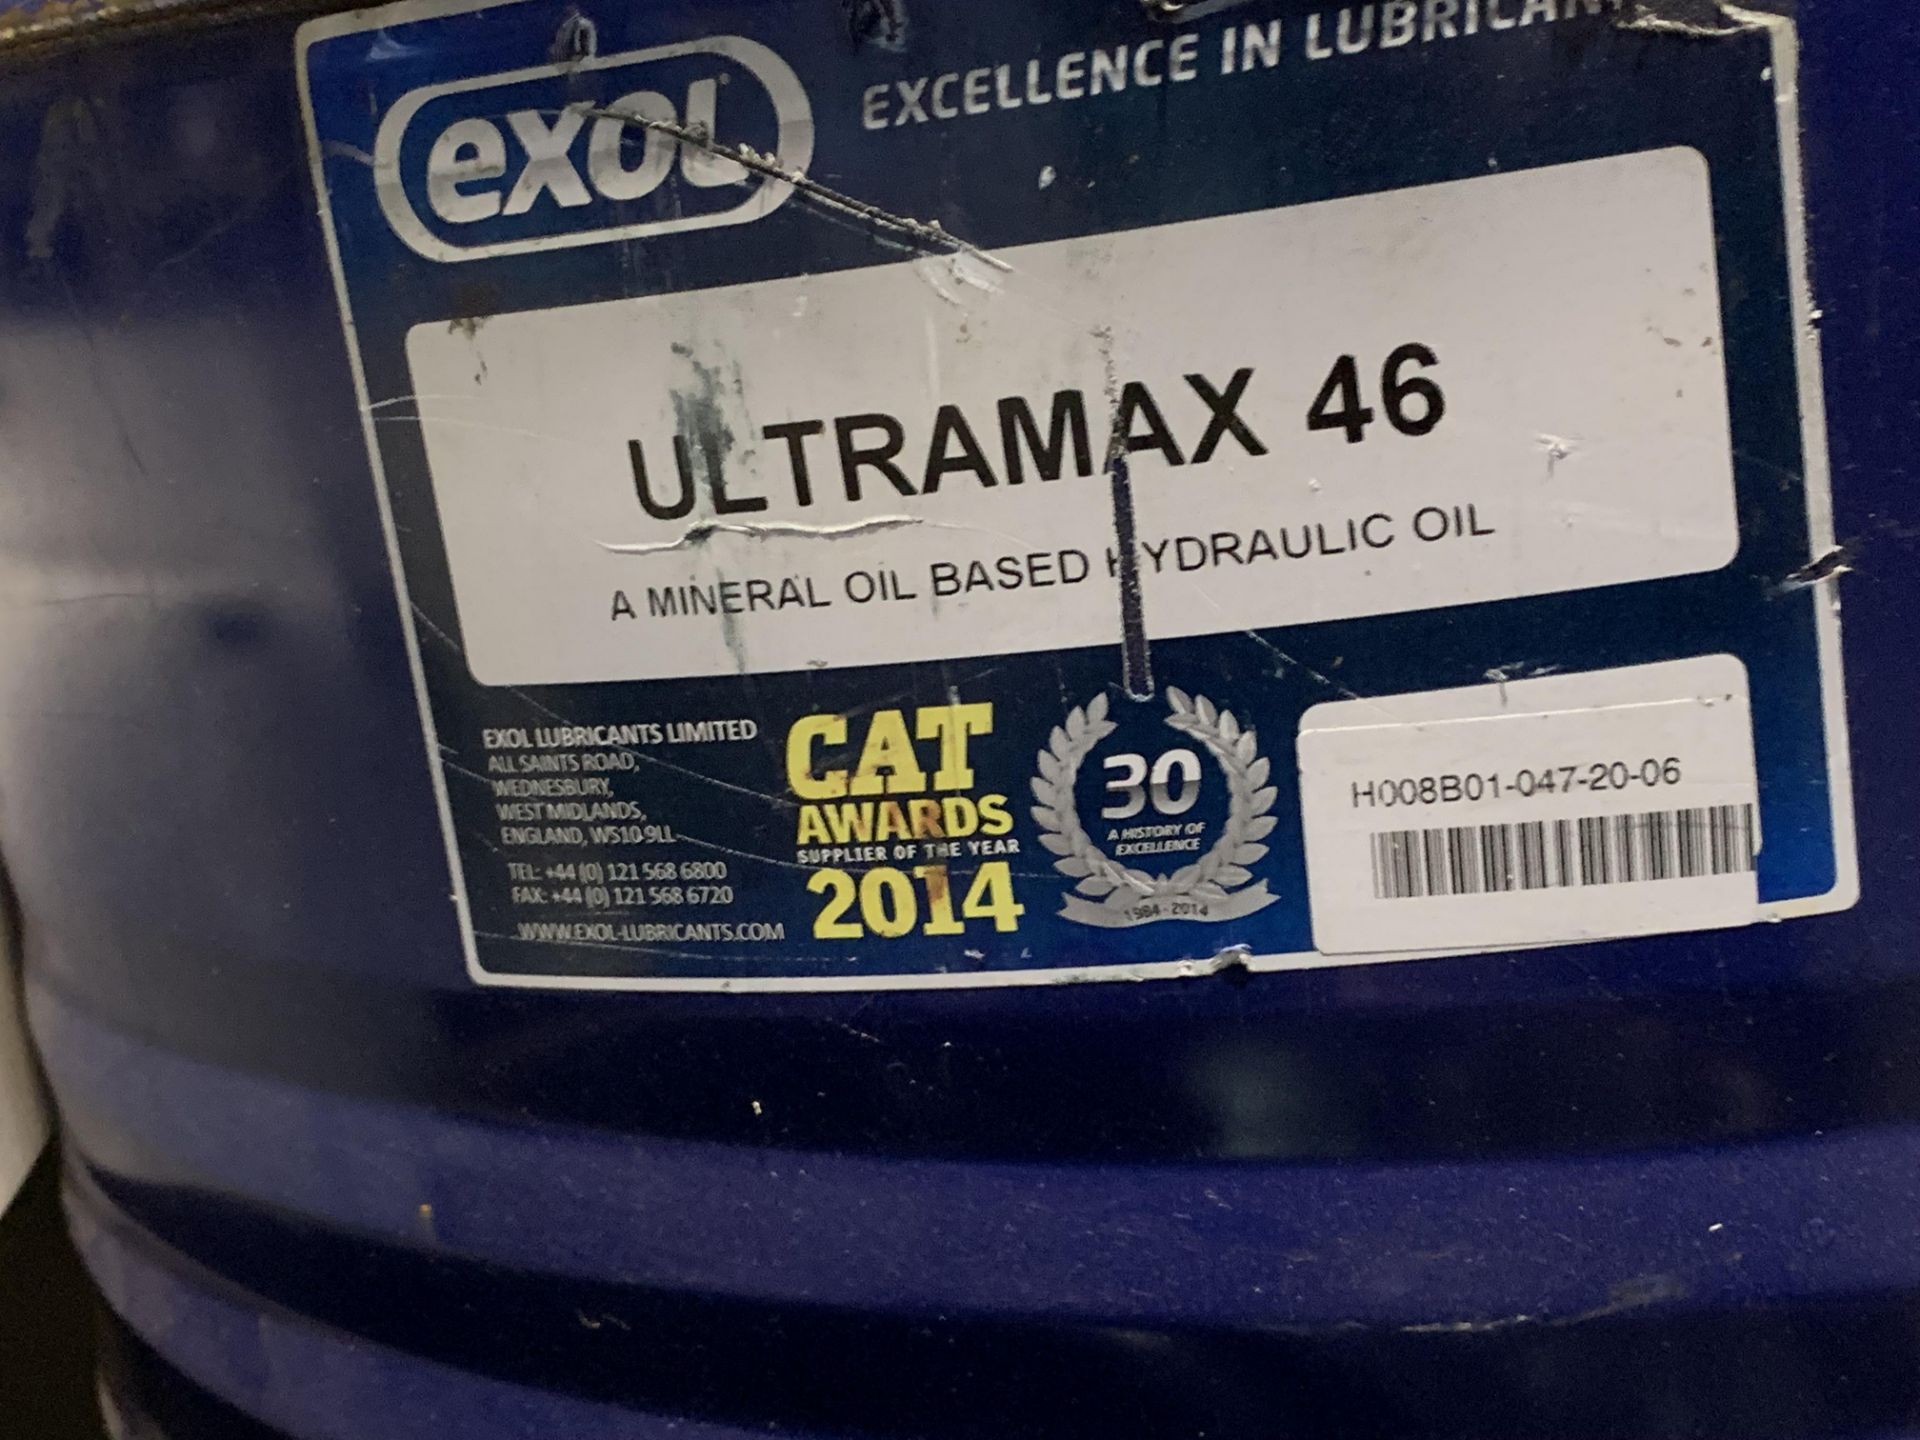 Exol mineral hydraulic oil Ultramax 46 - 205L drum - Image 3 of 3